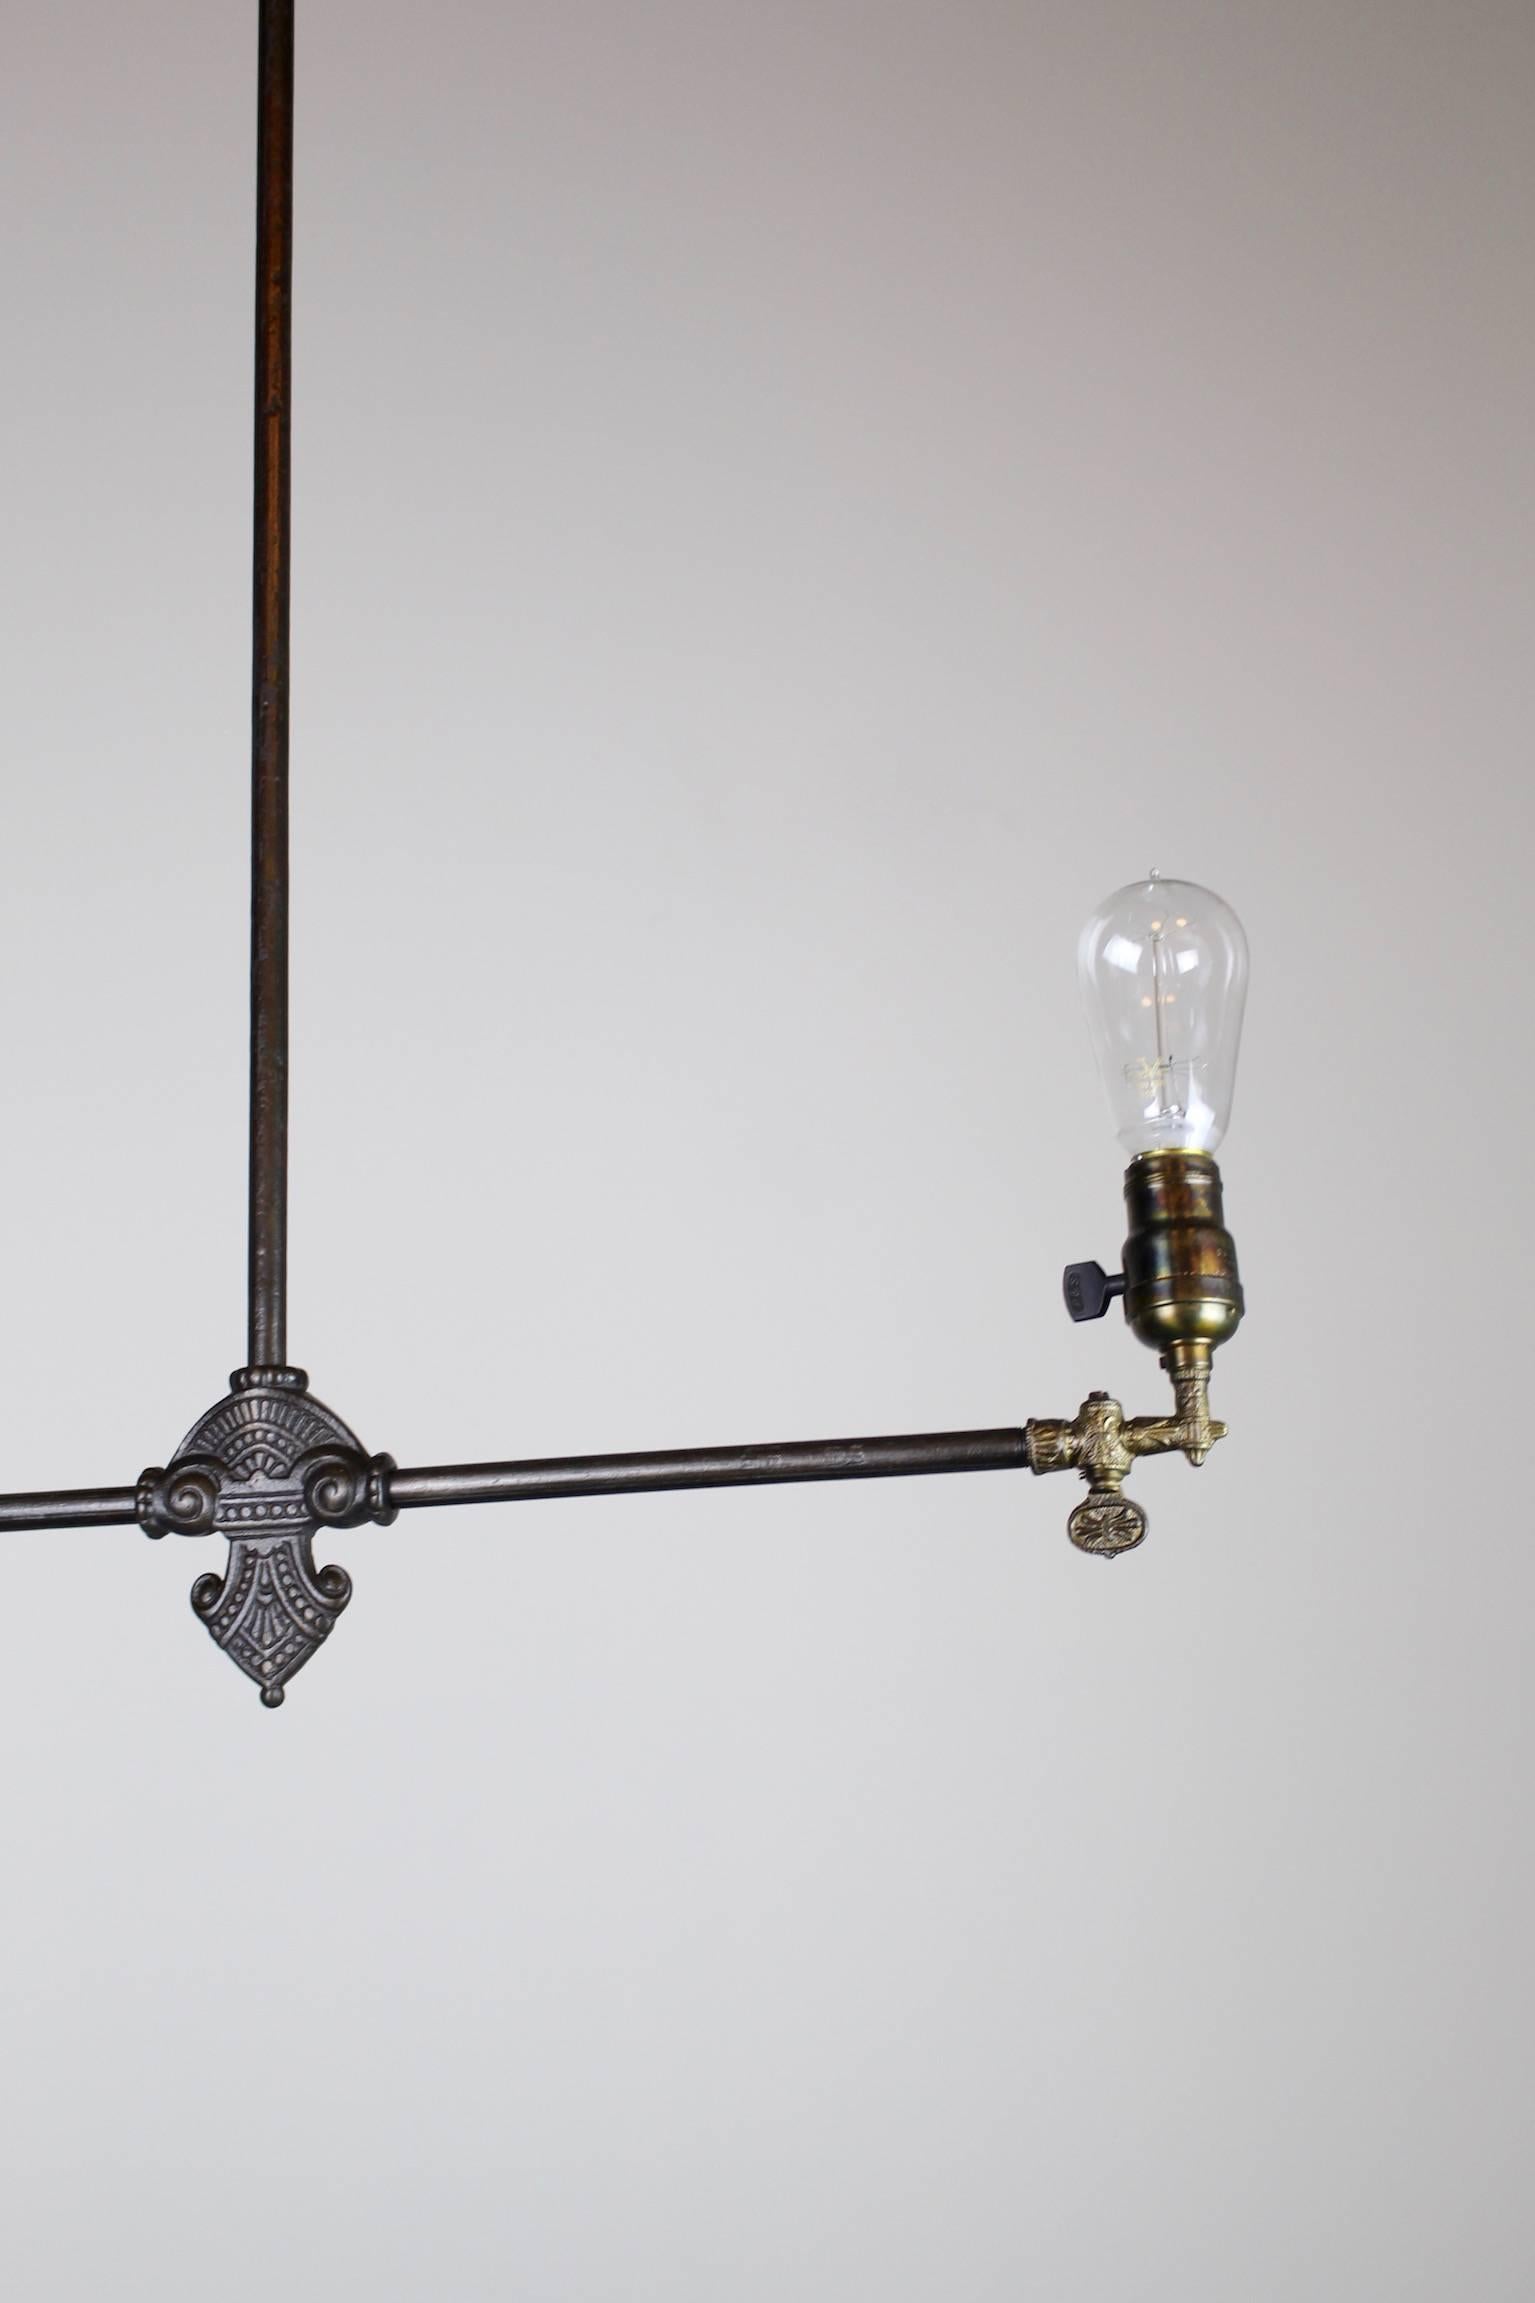 Original Industrial Gas Light Fixture, circa 1885 by Archer & Pancoast In Excellent Condition For Sale In Vancouver, BC